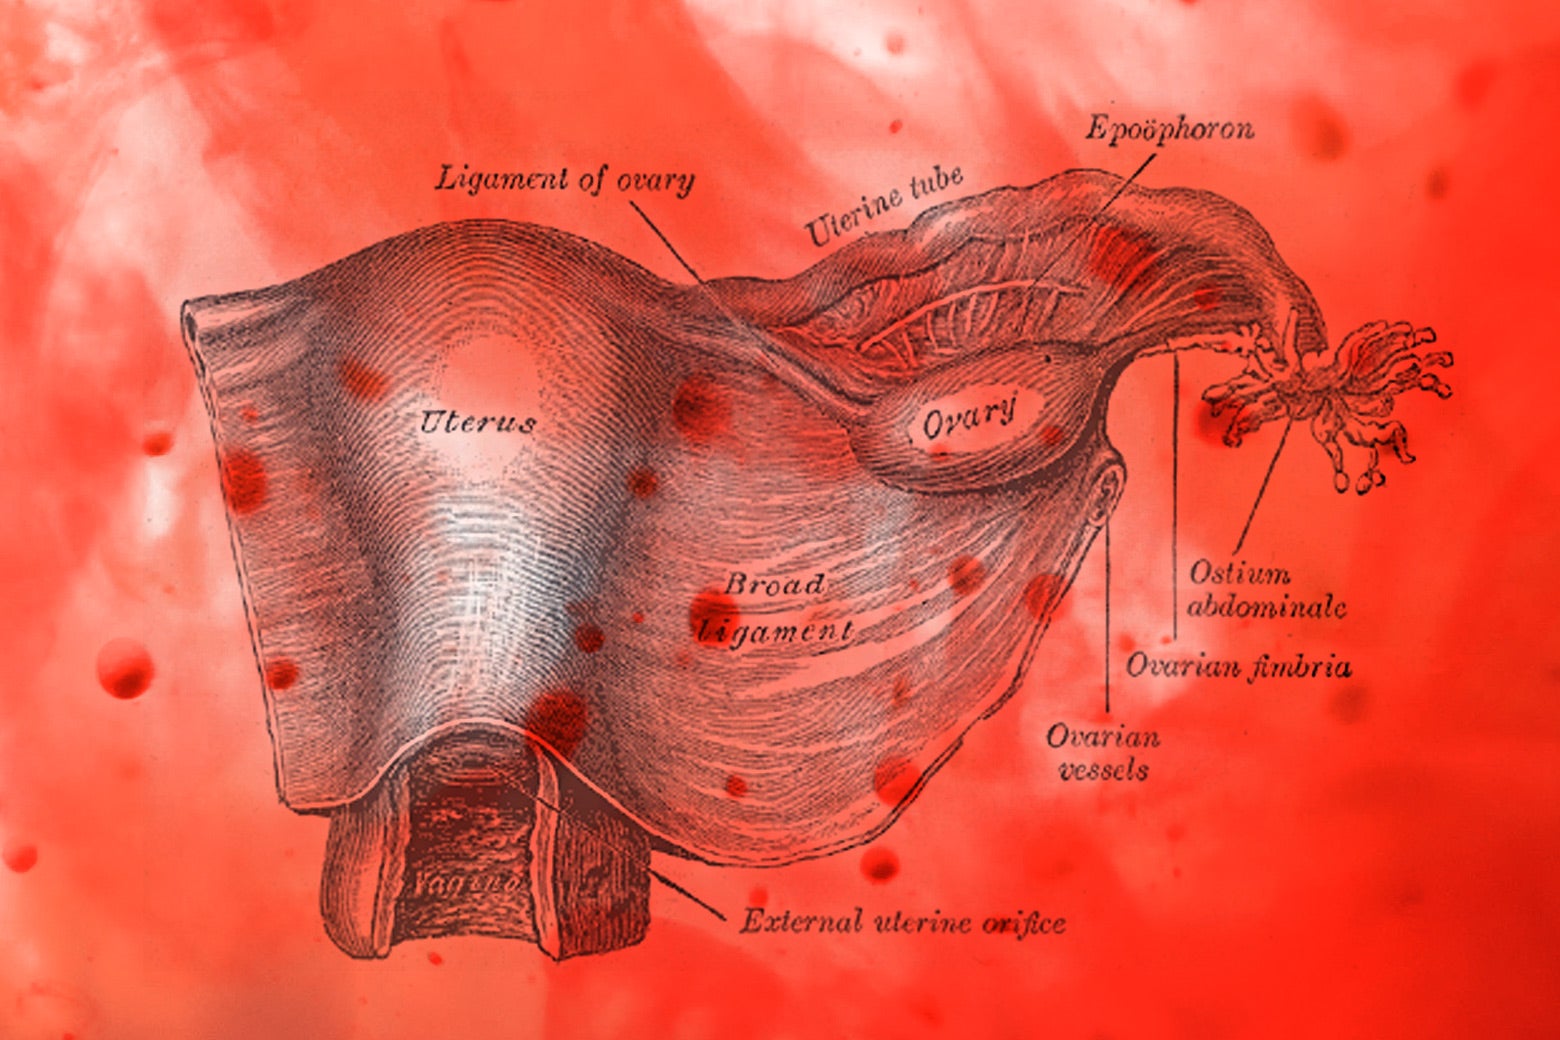 A medical diagram of the uterus, vagina and ovaries.